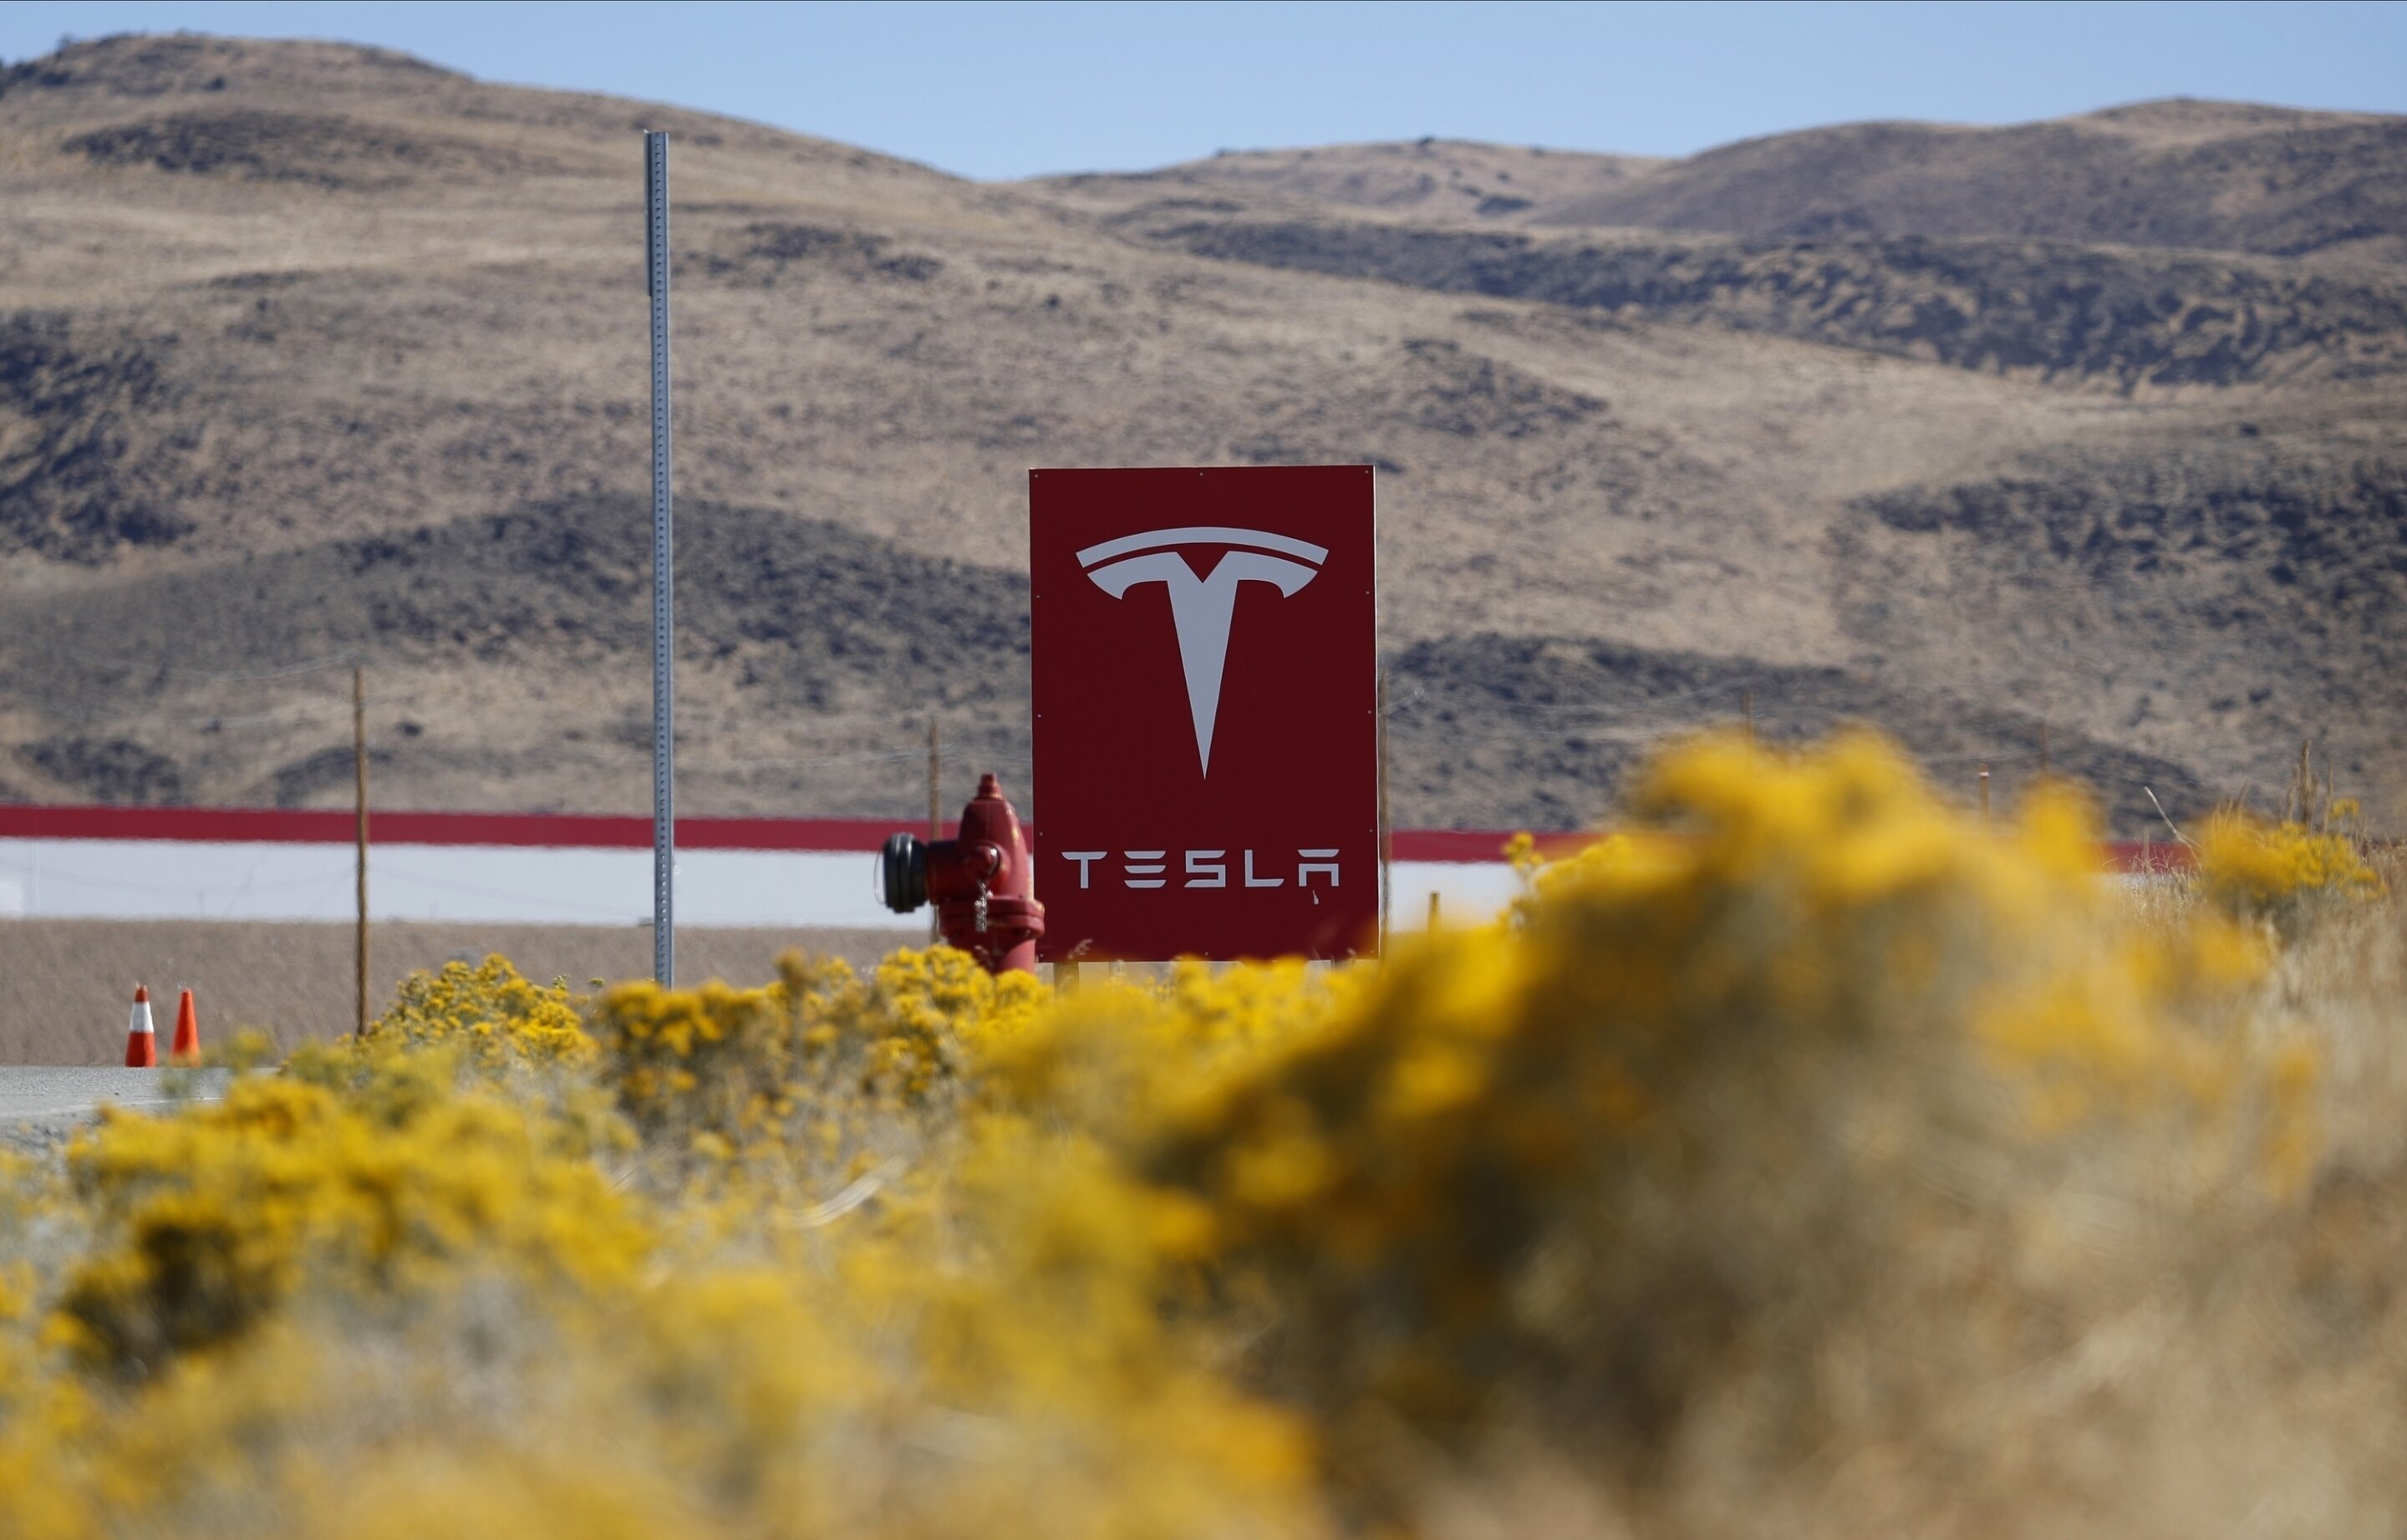 Tesla gets $330M tax deal for Nevada expansion, truck plant